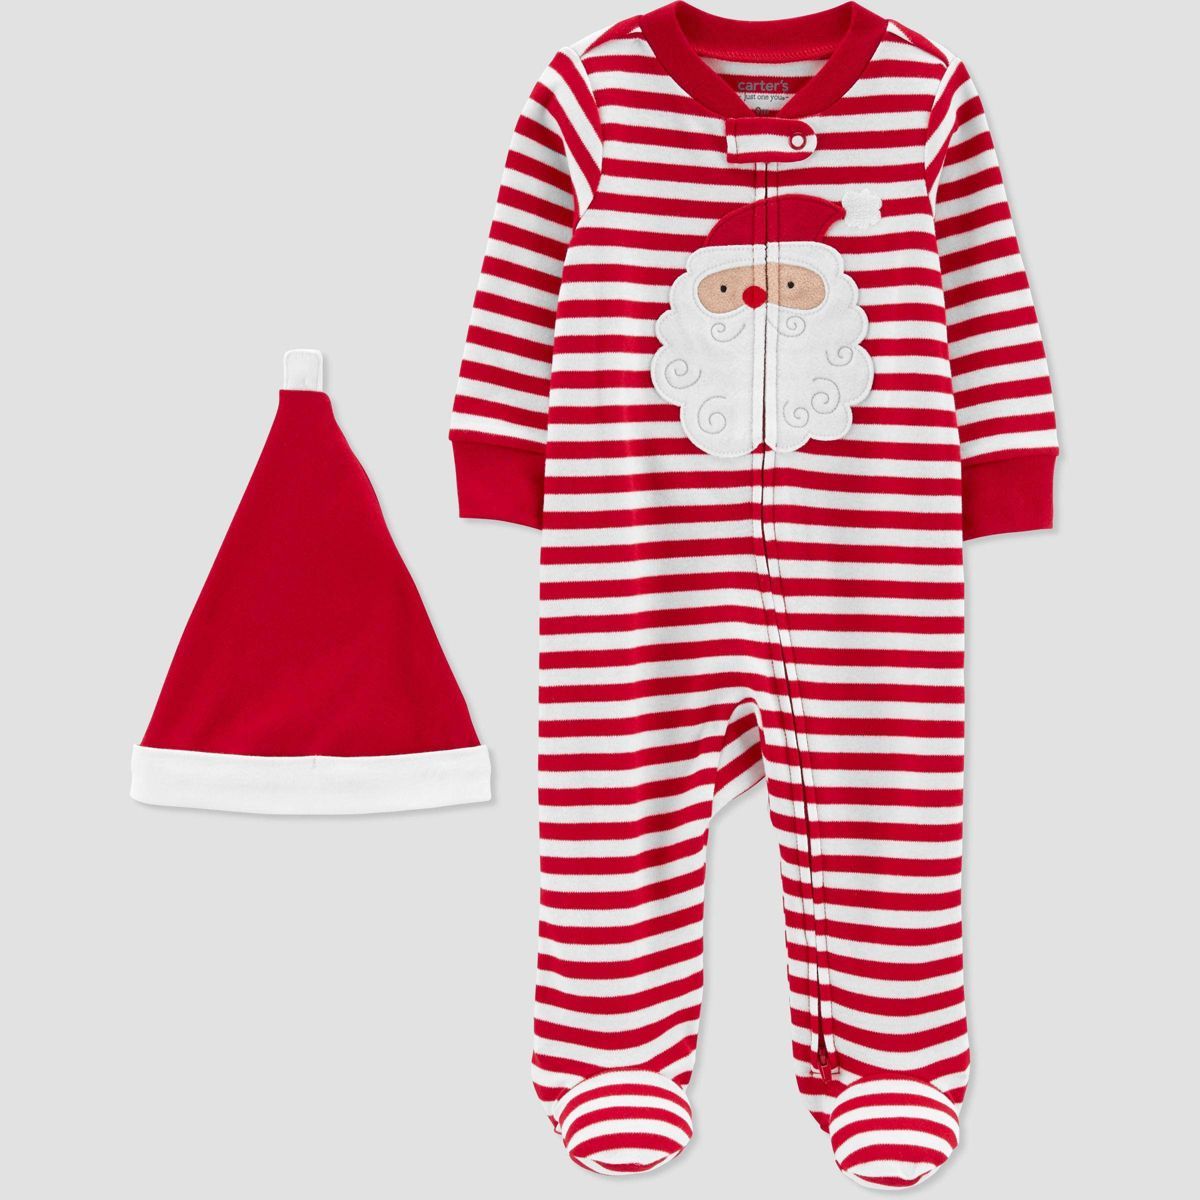 Carter's Just One You®️ Santa Striped Baby Sleep N' Play - Red/White | Target